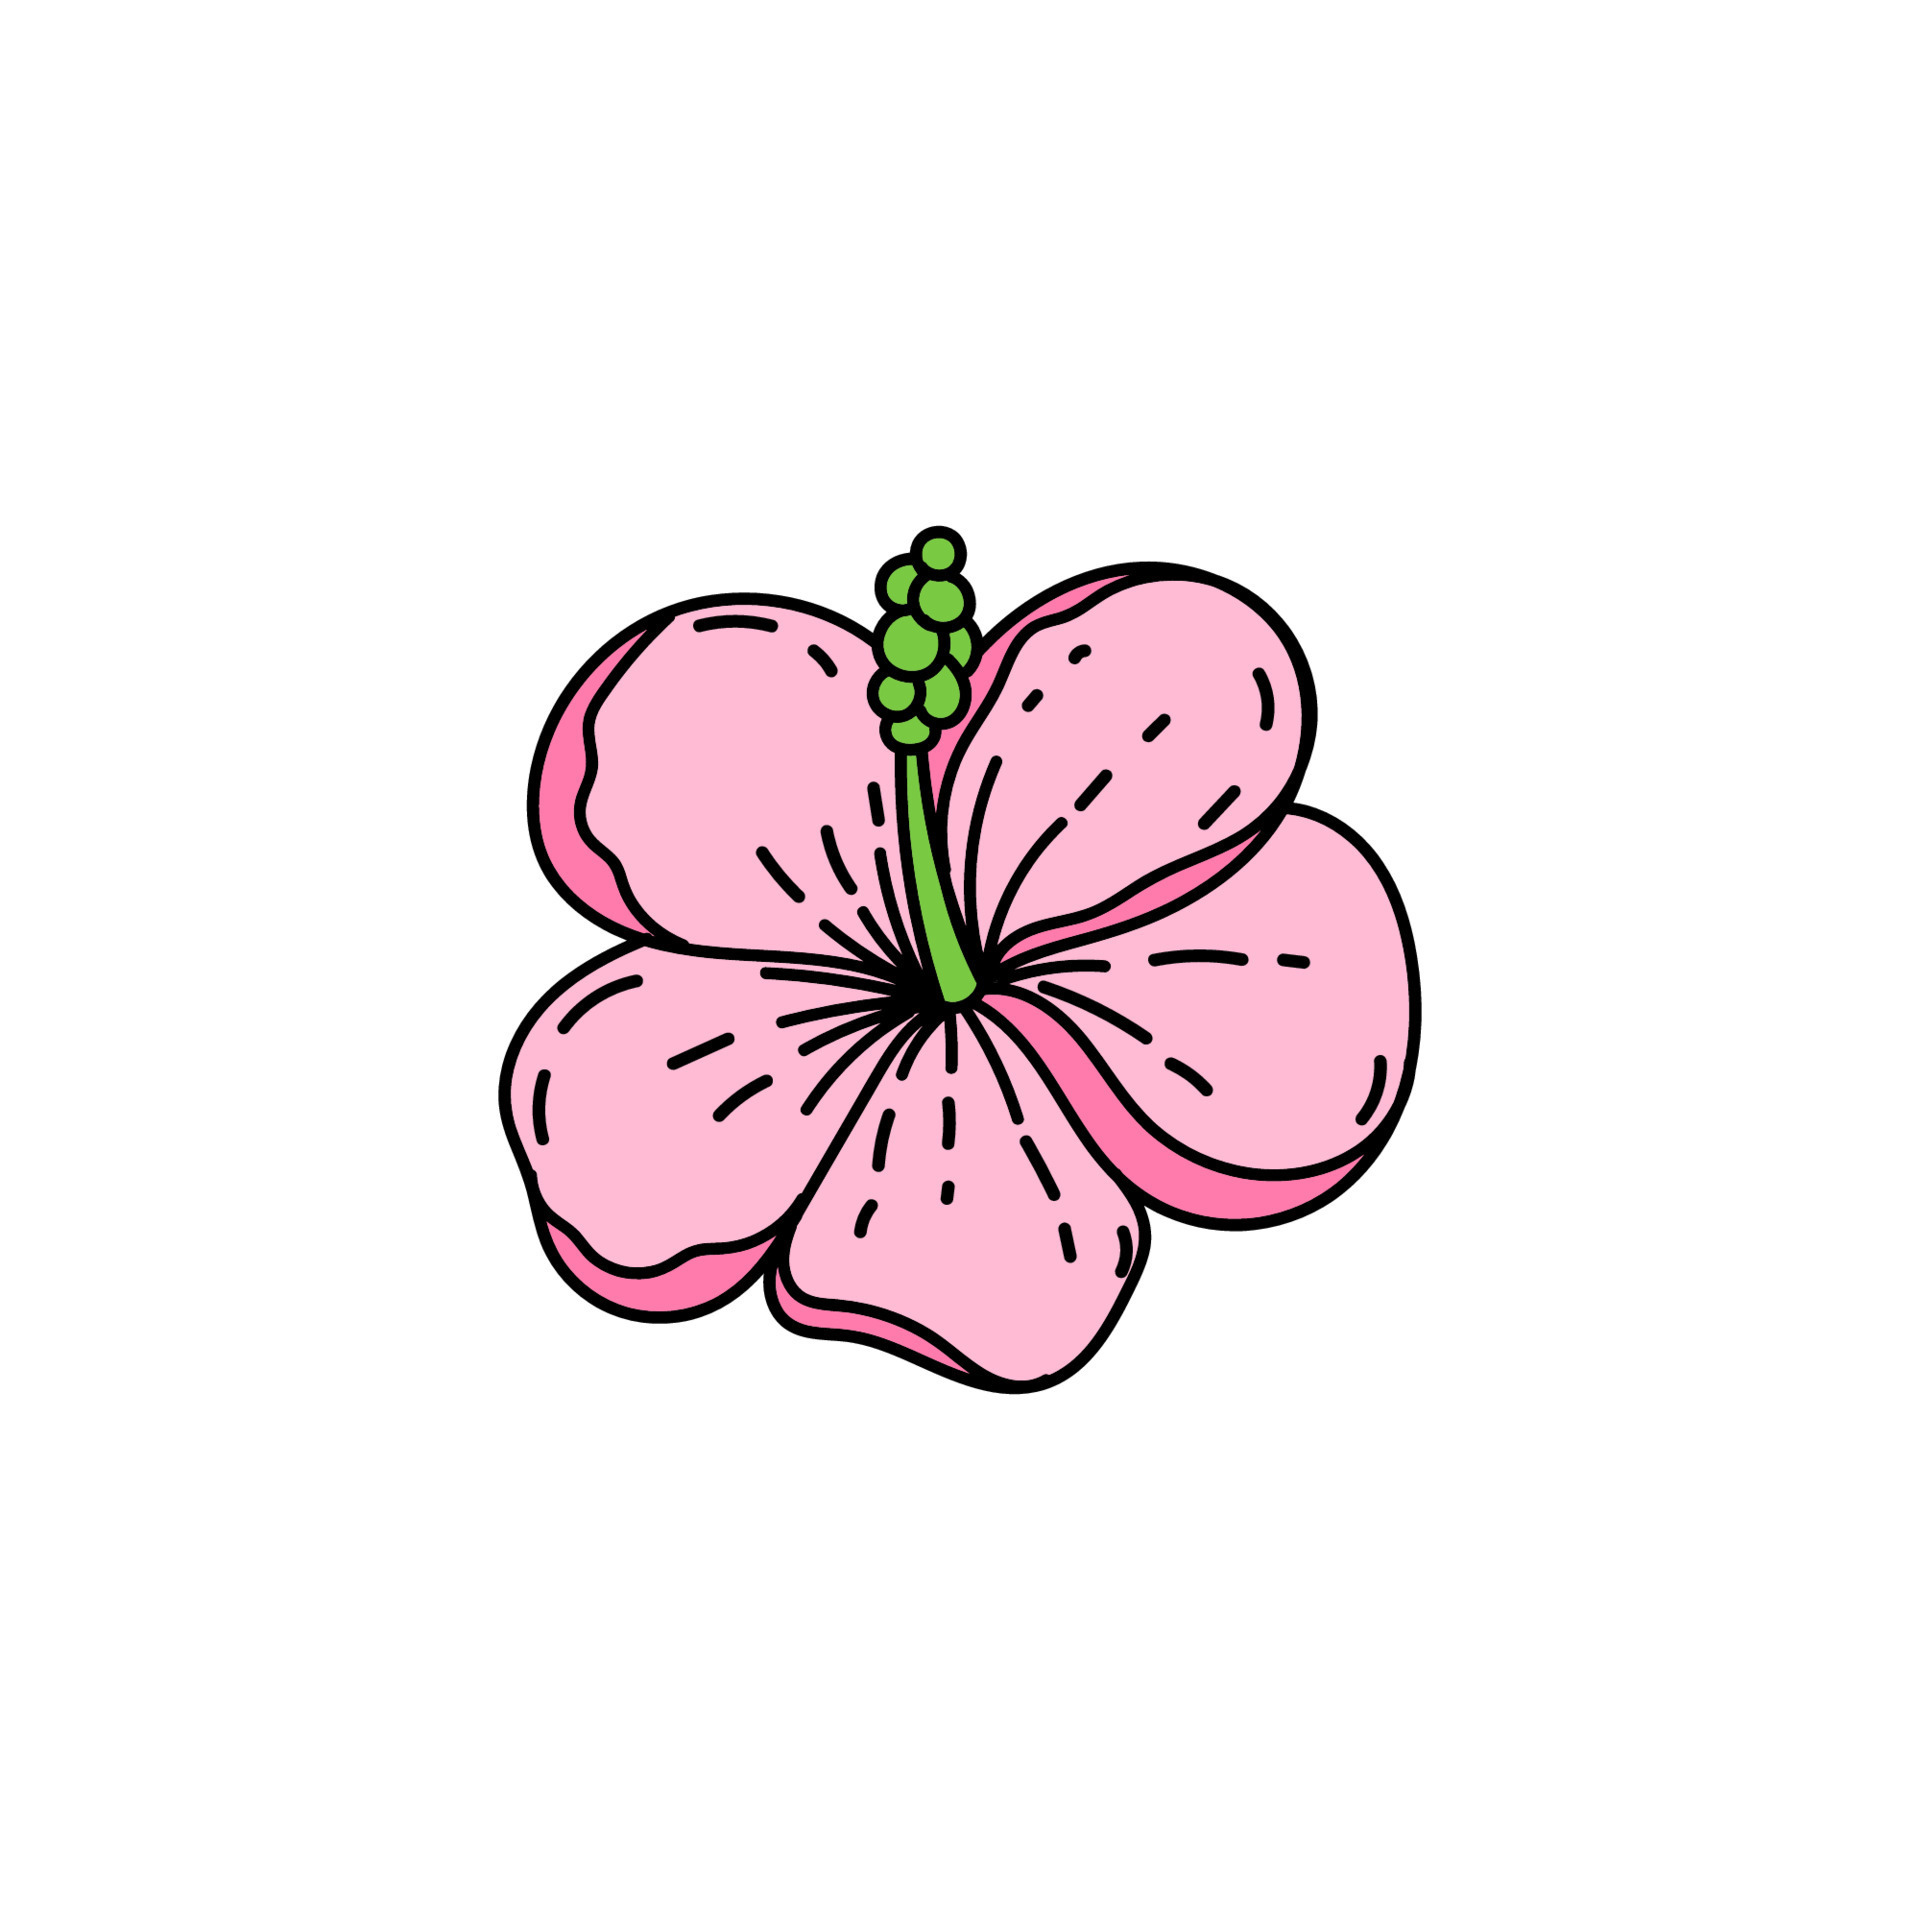 Hibiscus flower drawing Royalty Free Vector Image-saigonsouth.com.vn